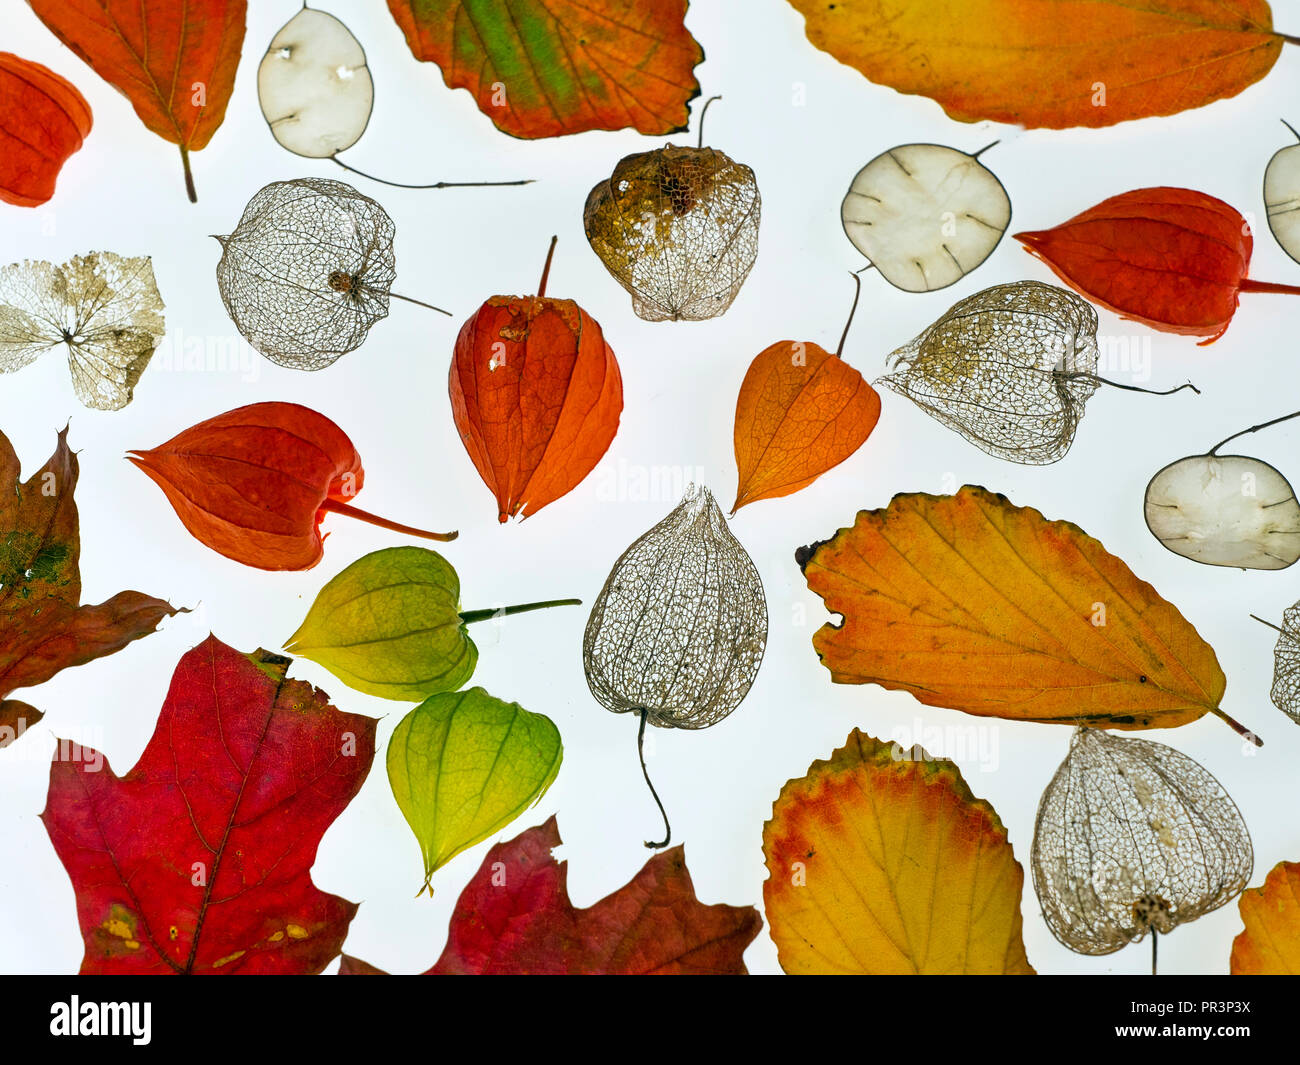 autumn garden layout with autumn leaves honesty seeds and chinese lanterns Stock Photo